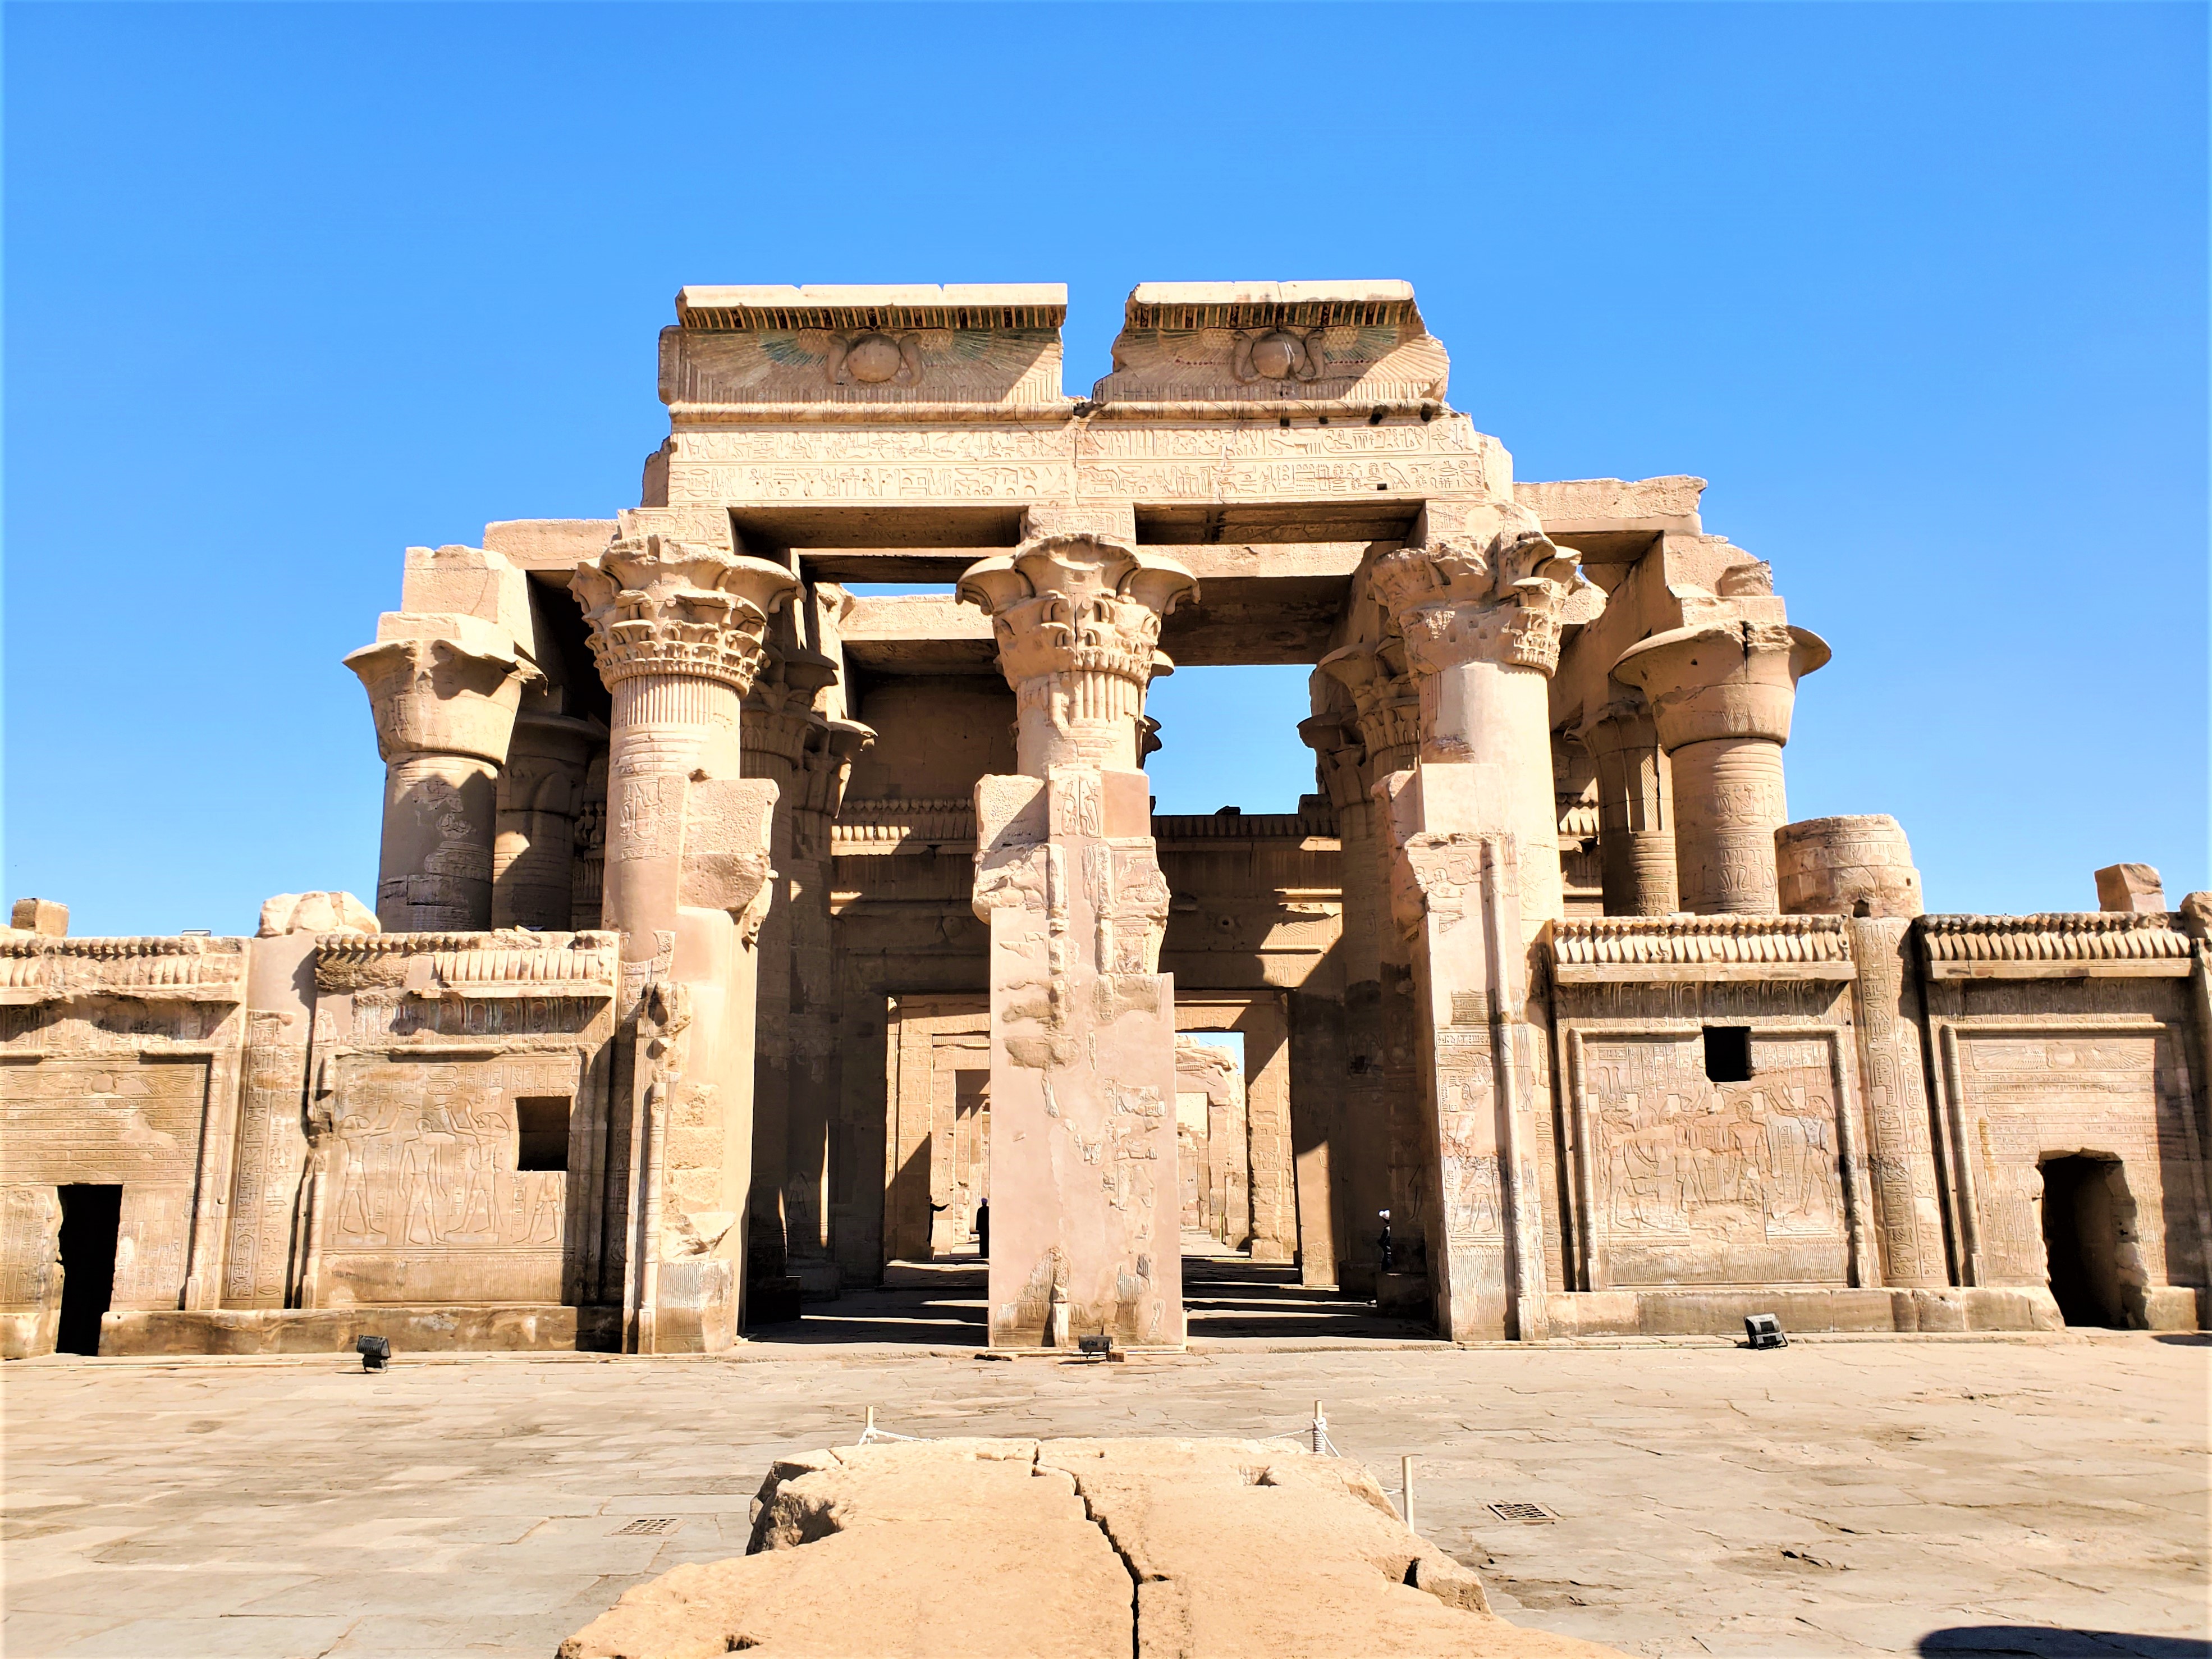 The majestic Kom Ombo temple between Luxor and Aswan, in Egypt